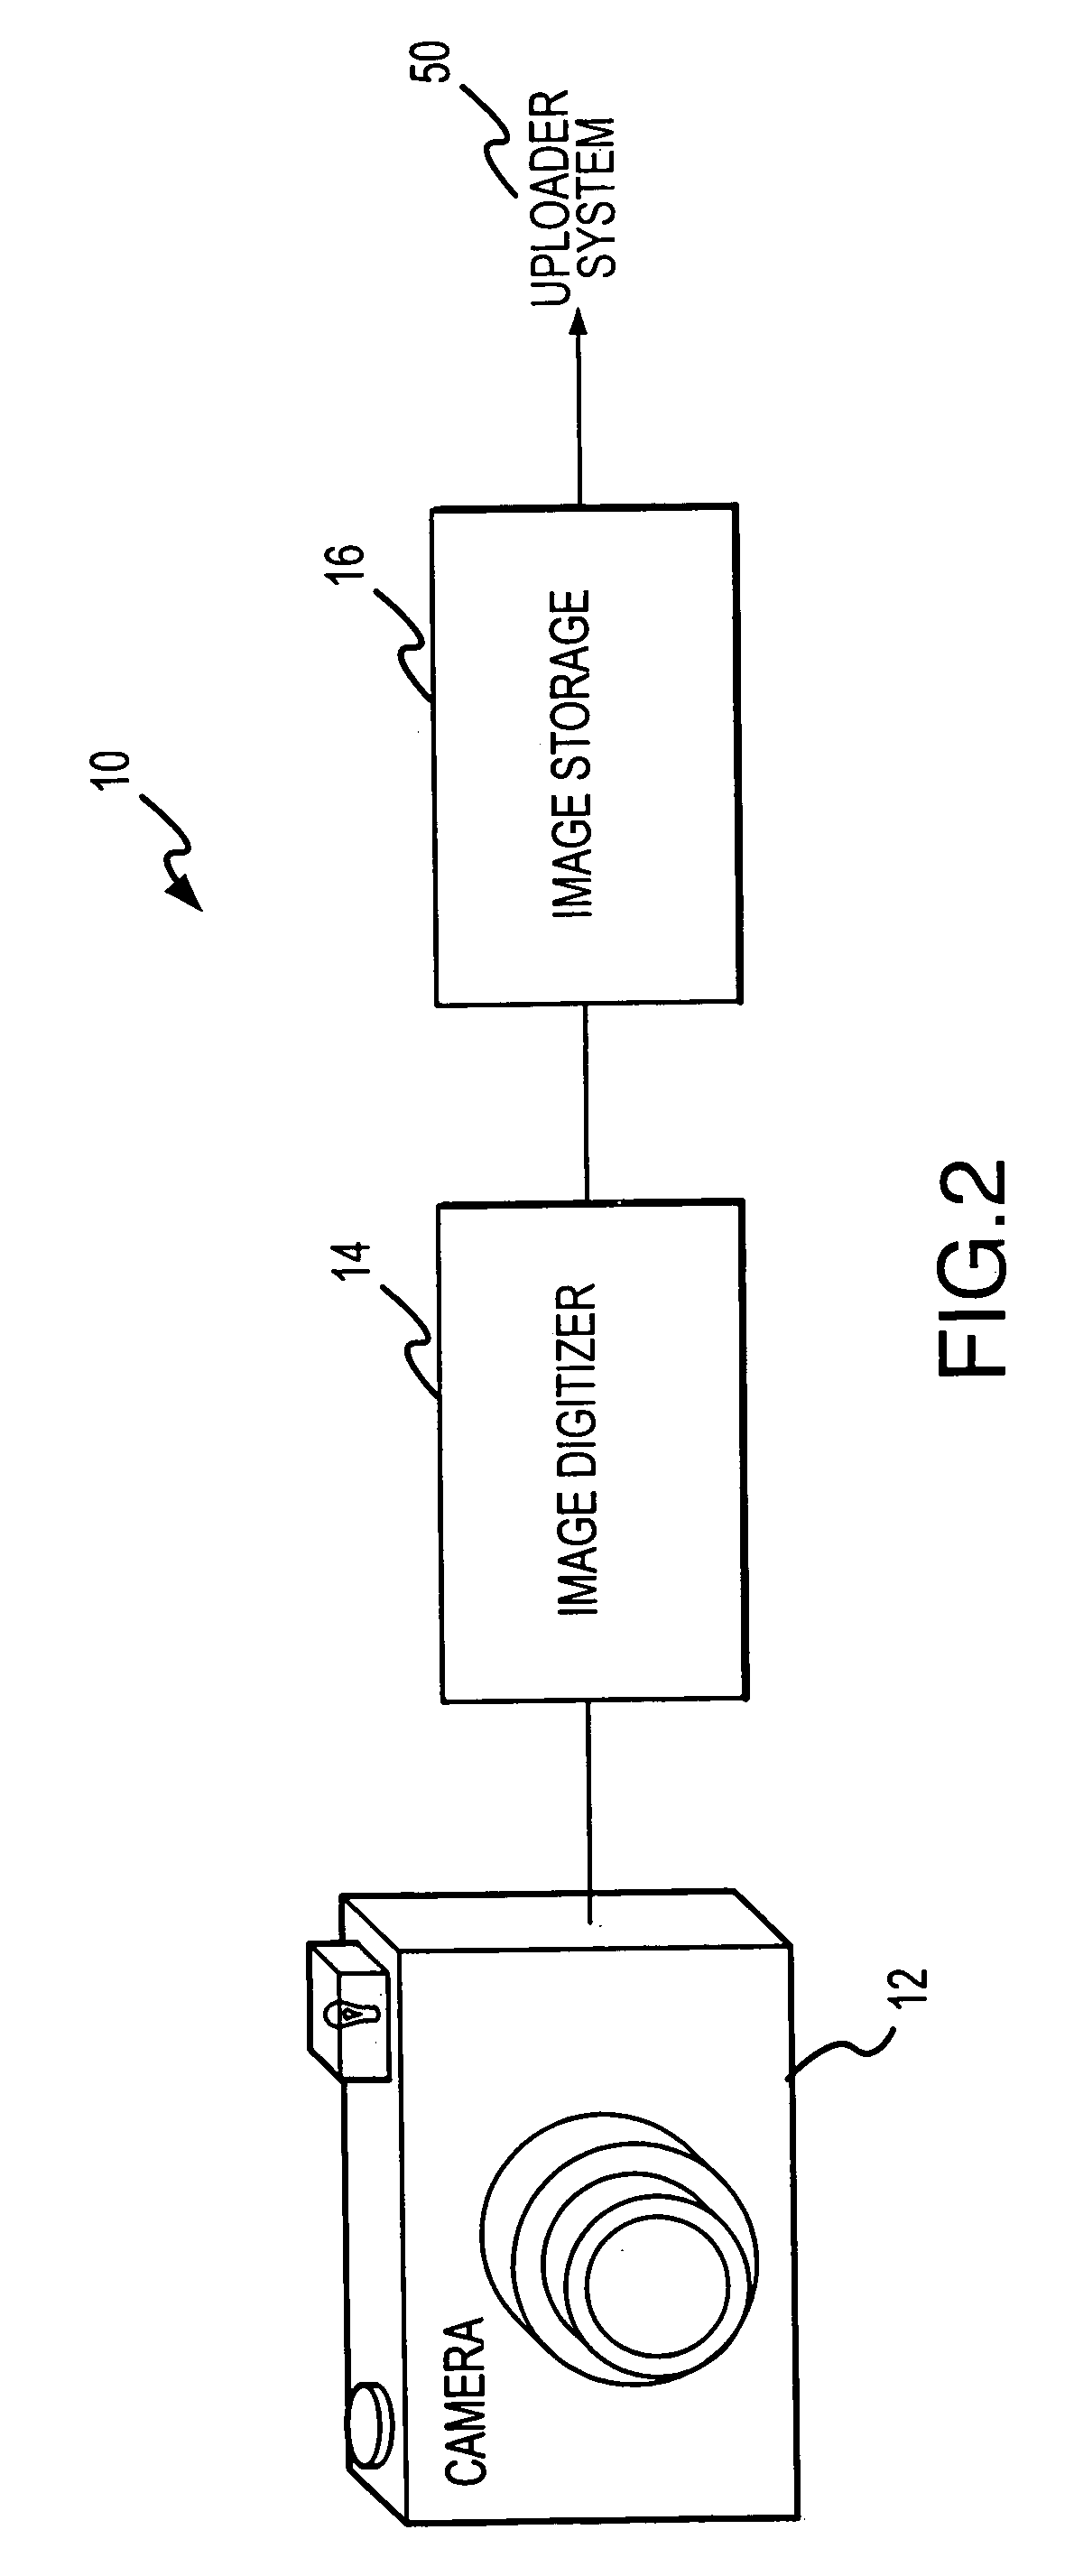 Systems and methods for remote viewing of patient images